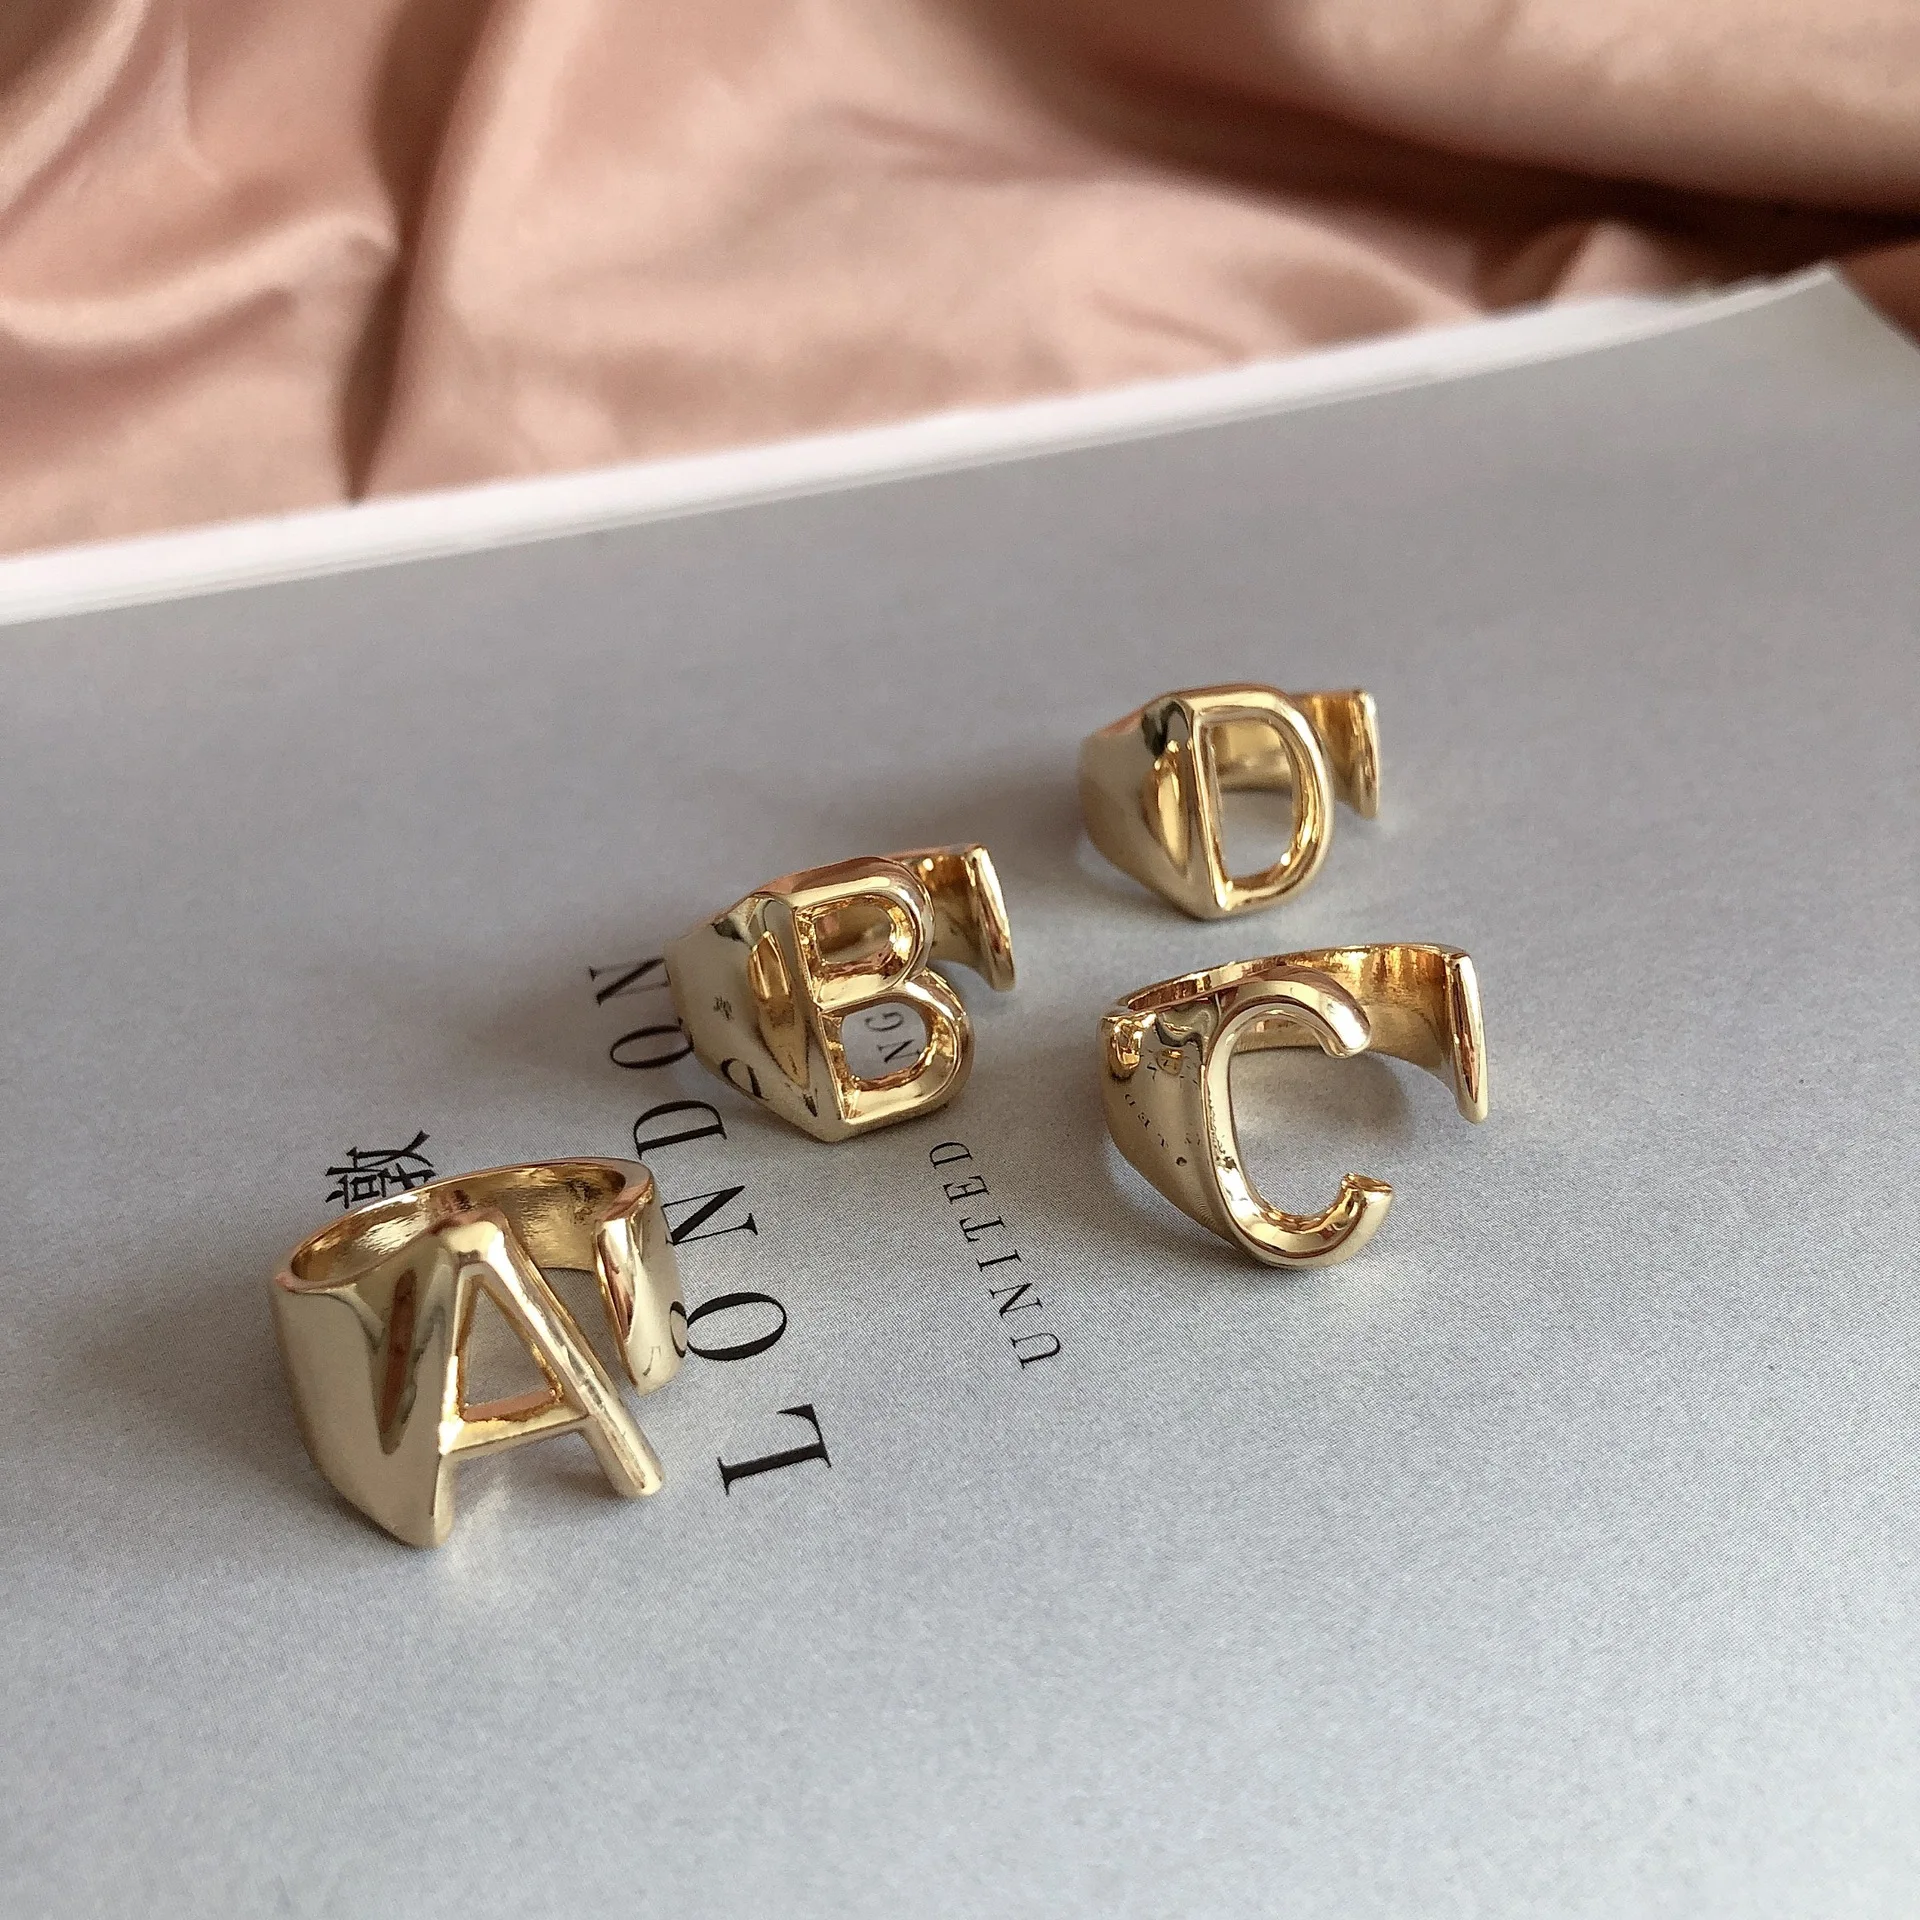 

Korea 26 English letters alphabet Rings With adjustable Female Openings Women Girl Party Gift Anillos Mujer Bague Anel bijoux